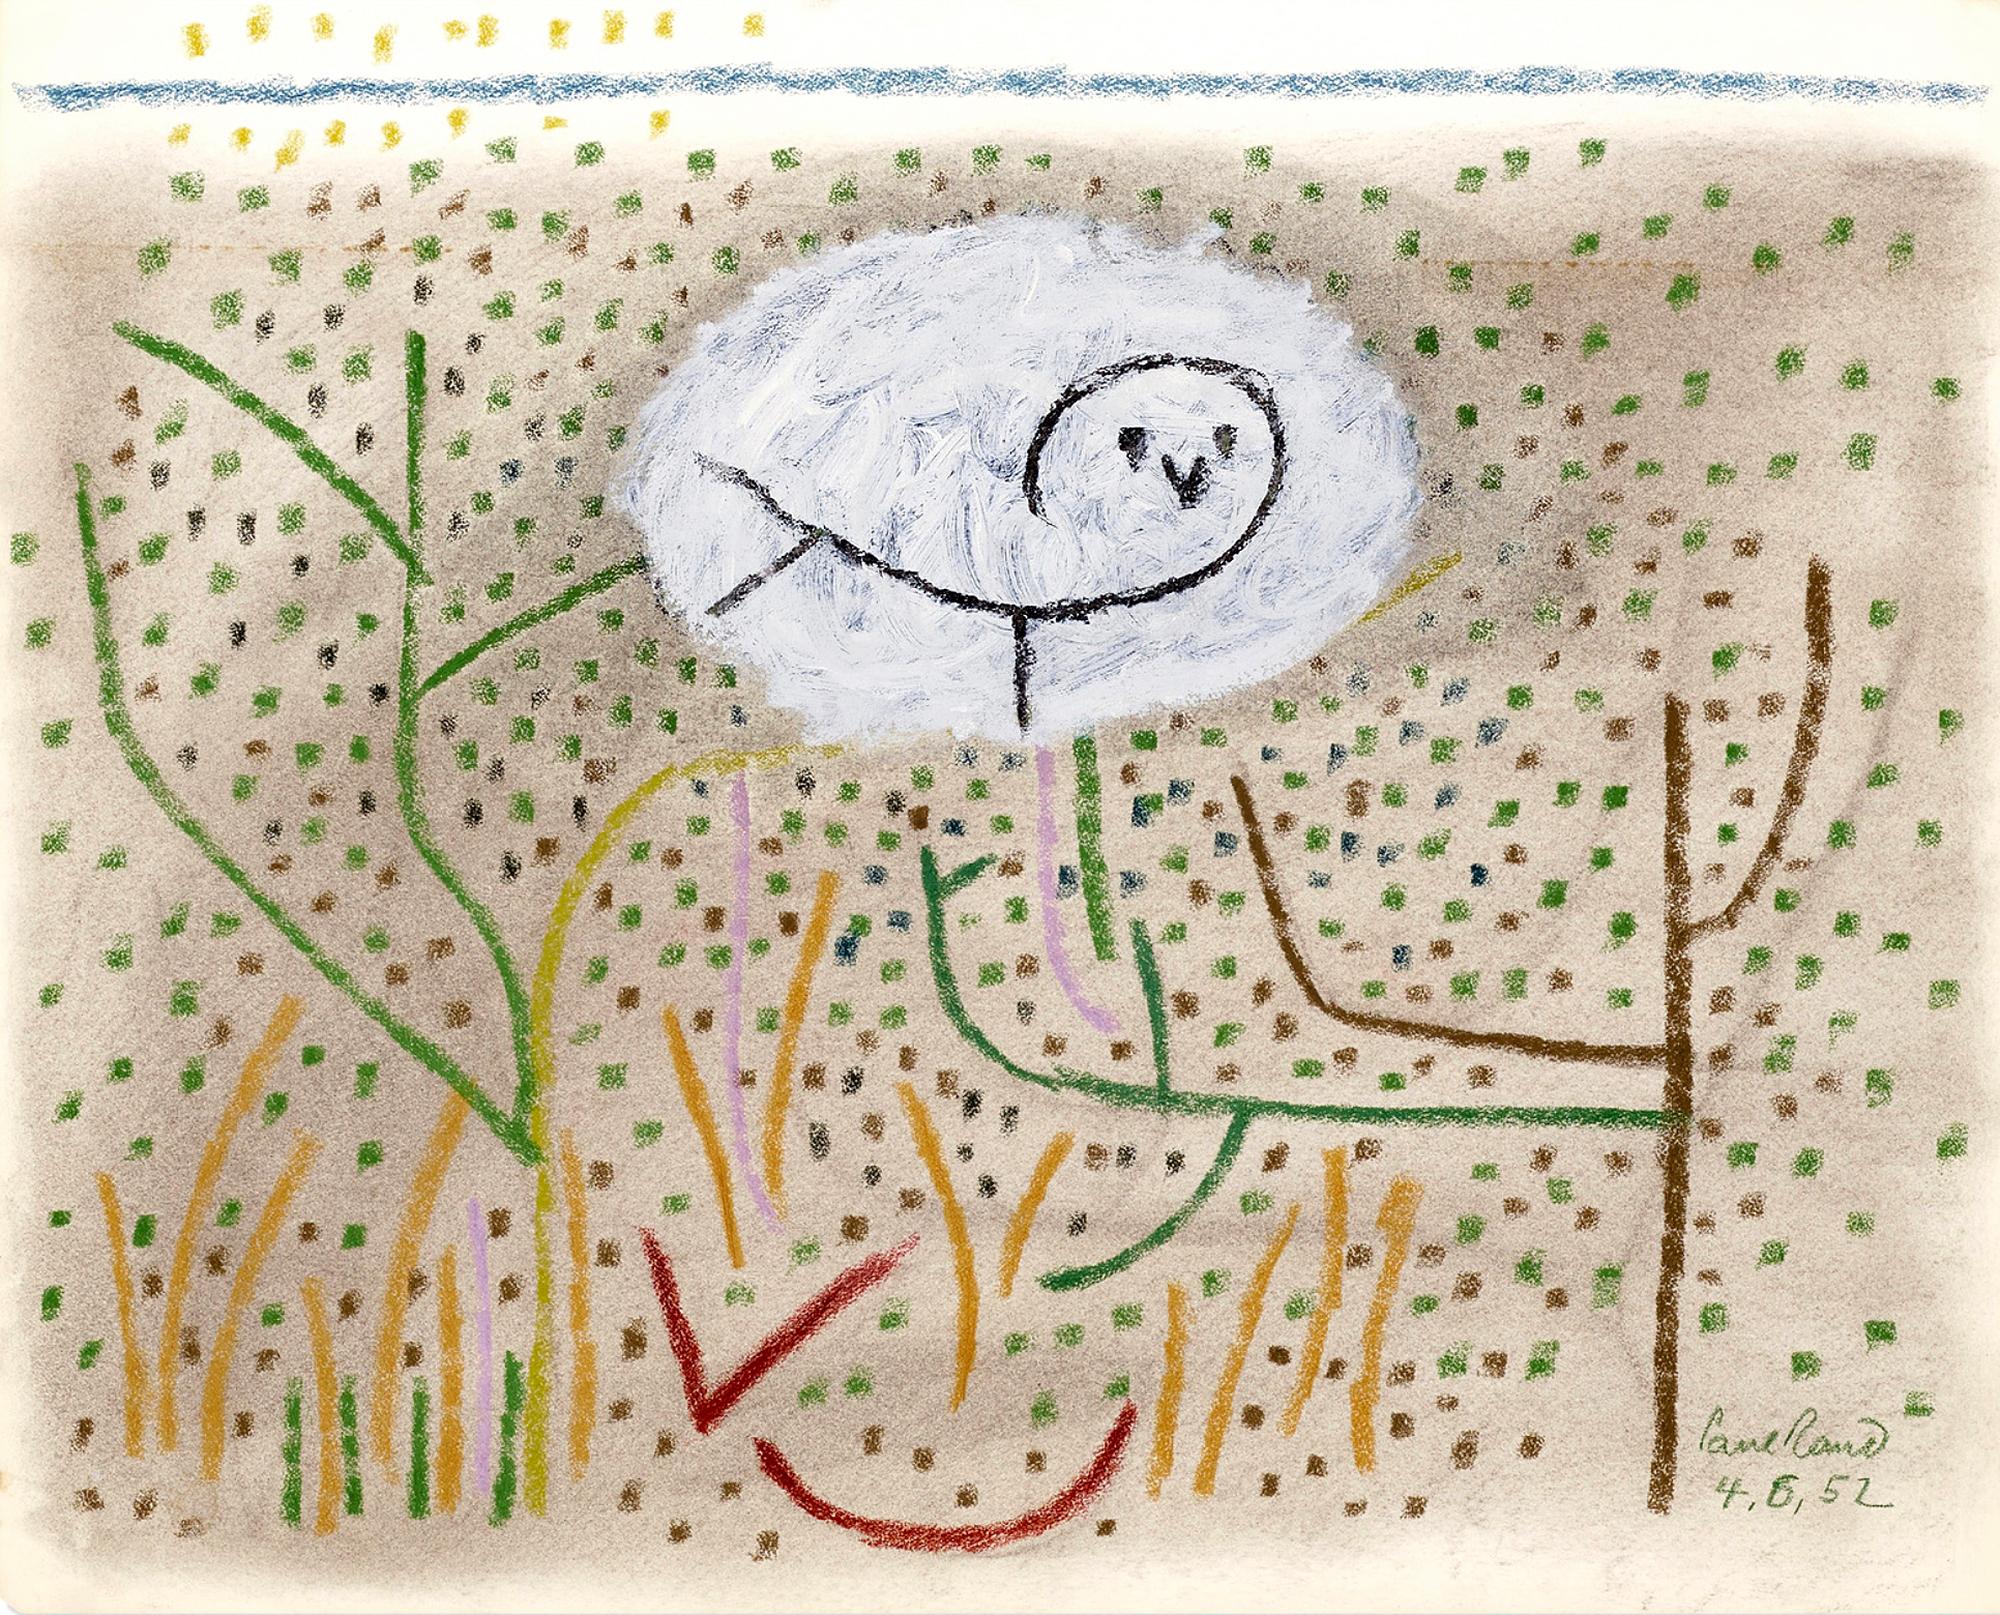 The Owl in the Grass (ohne Titel)